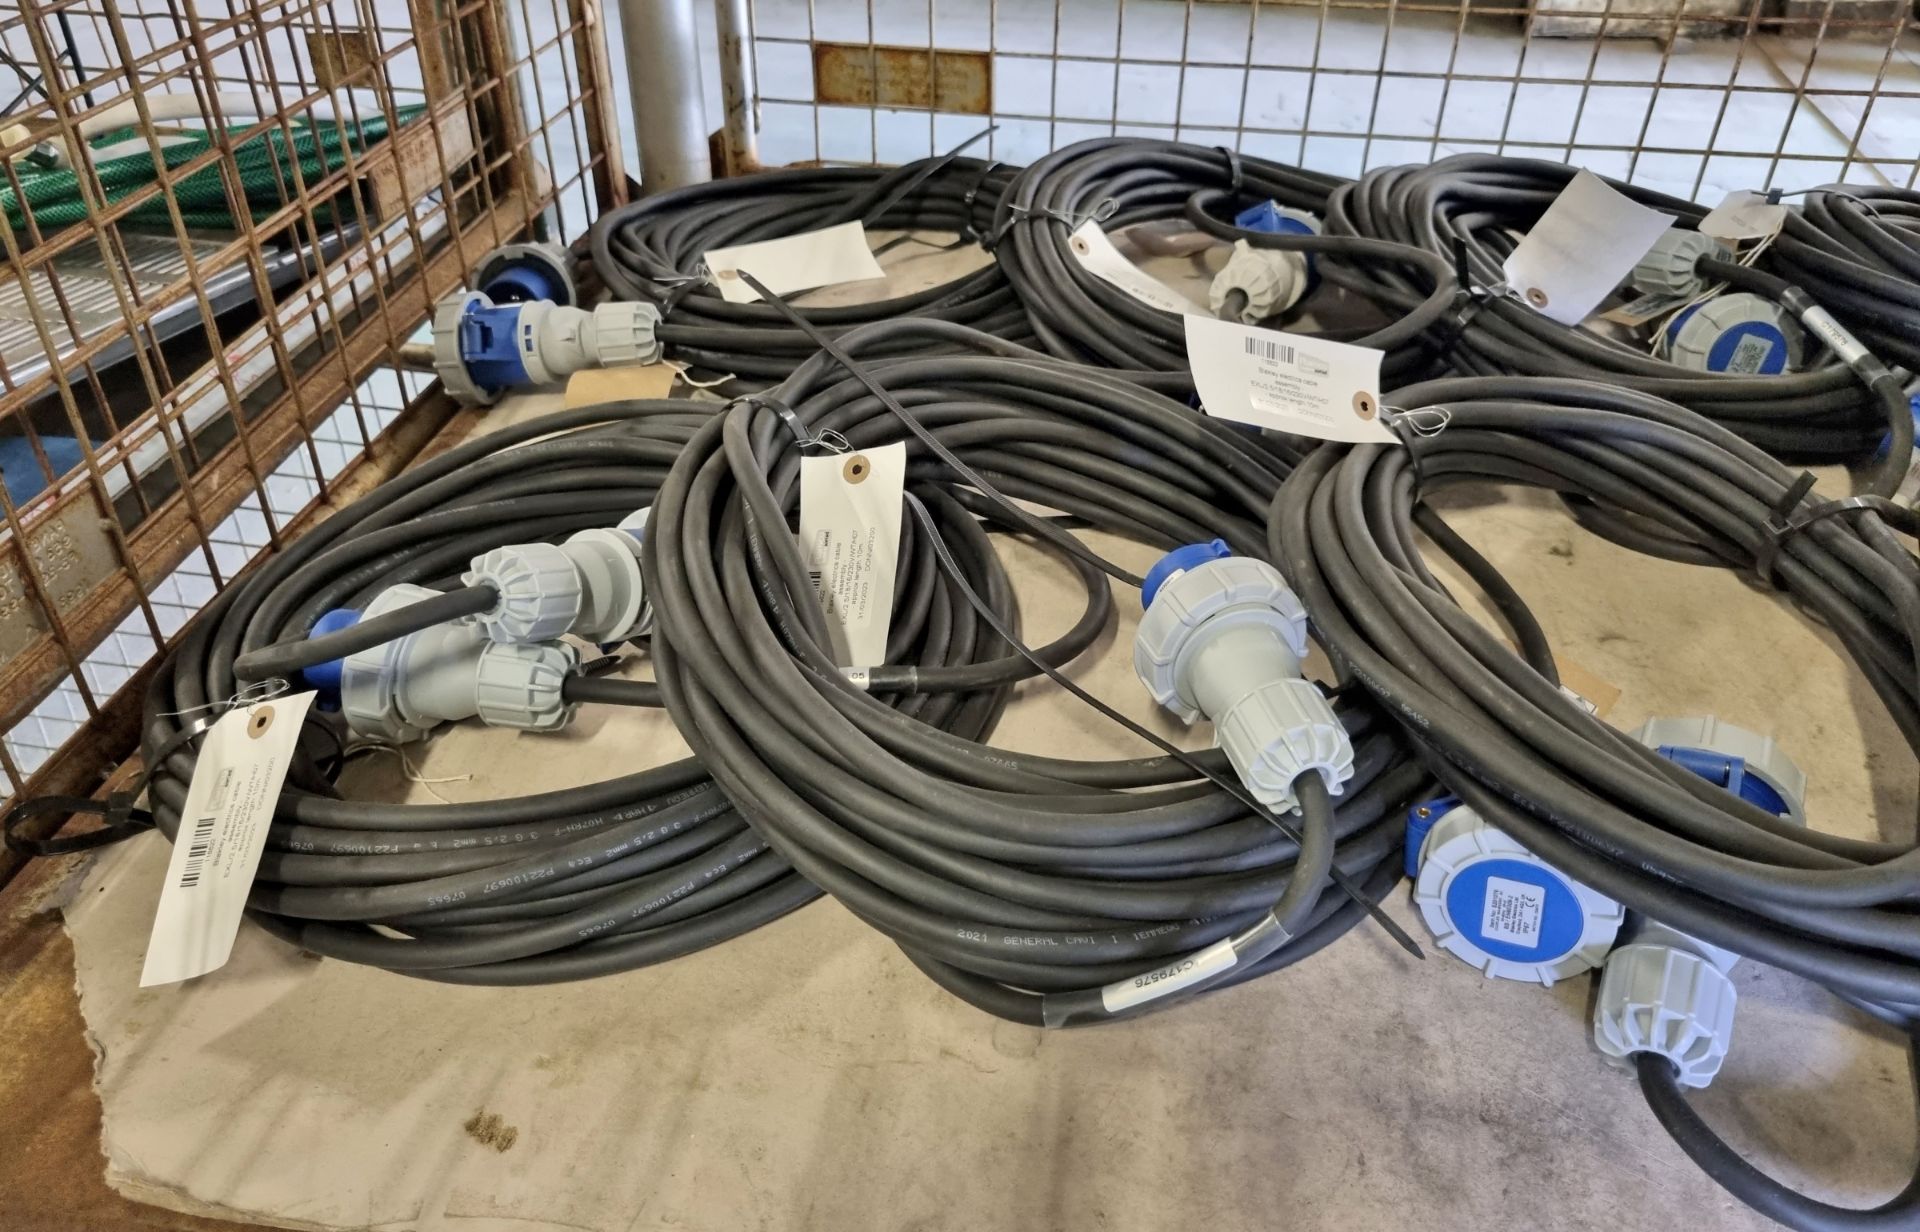 8x Blakley electrics cable assemblies - EXL/2.5/18/16/230V/WT/H07 - approx length 10m - Image 4 of 6